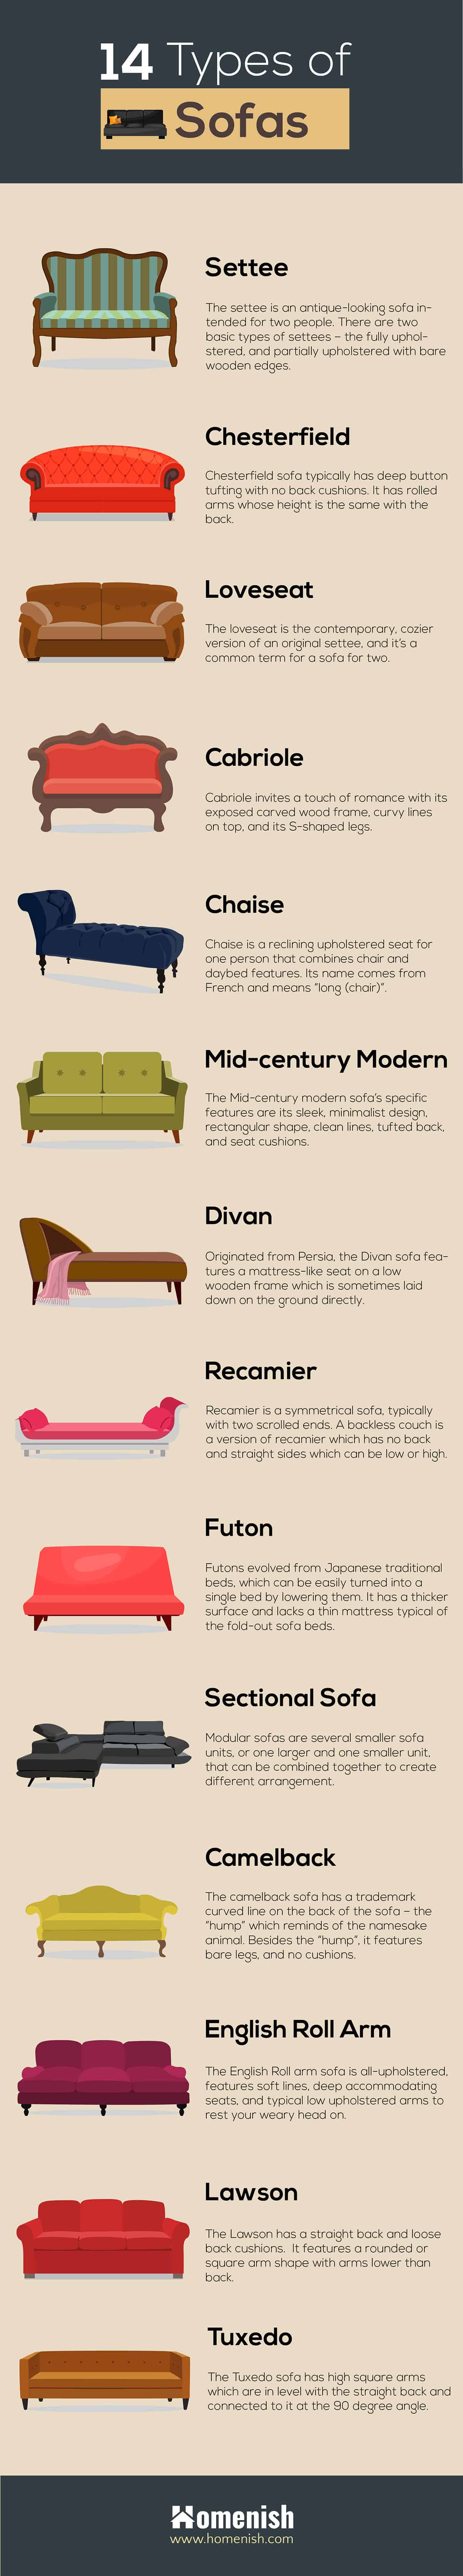 Types of Sofas and Couches Infographic